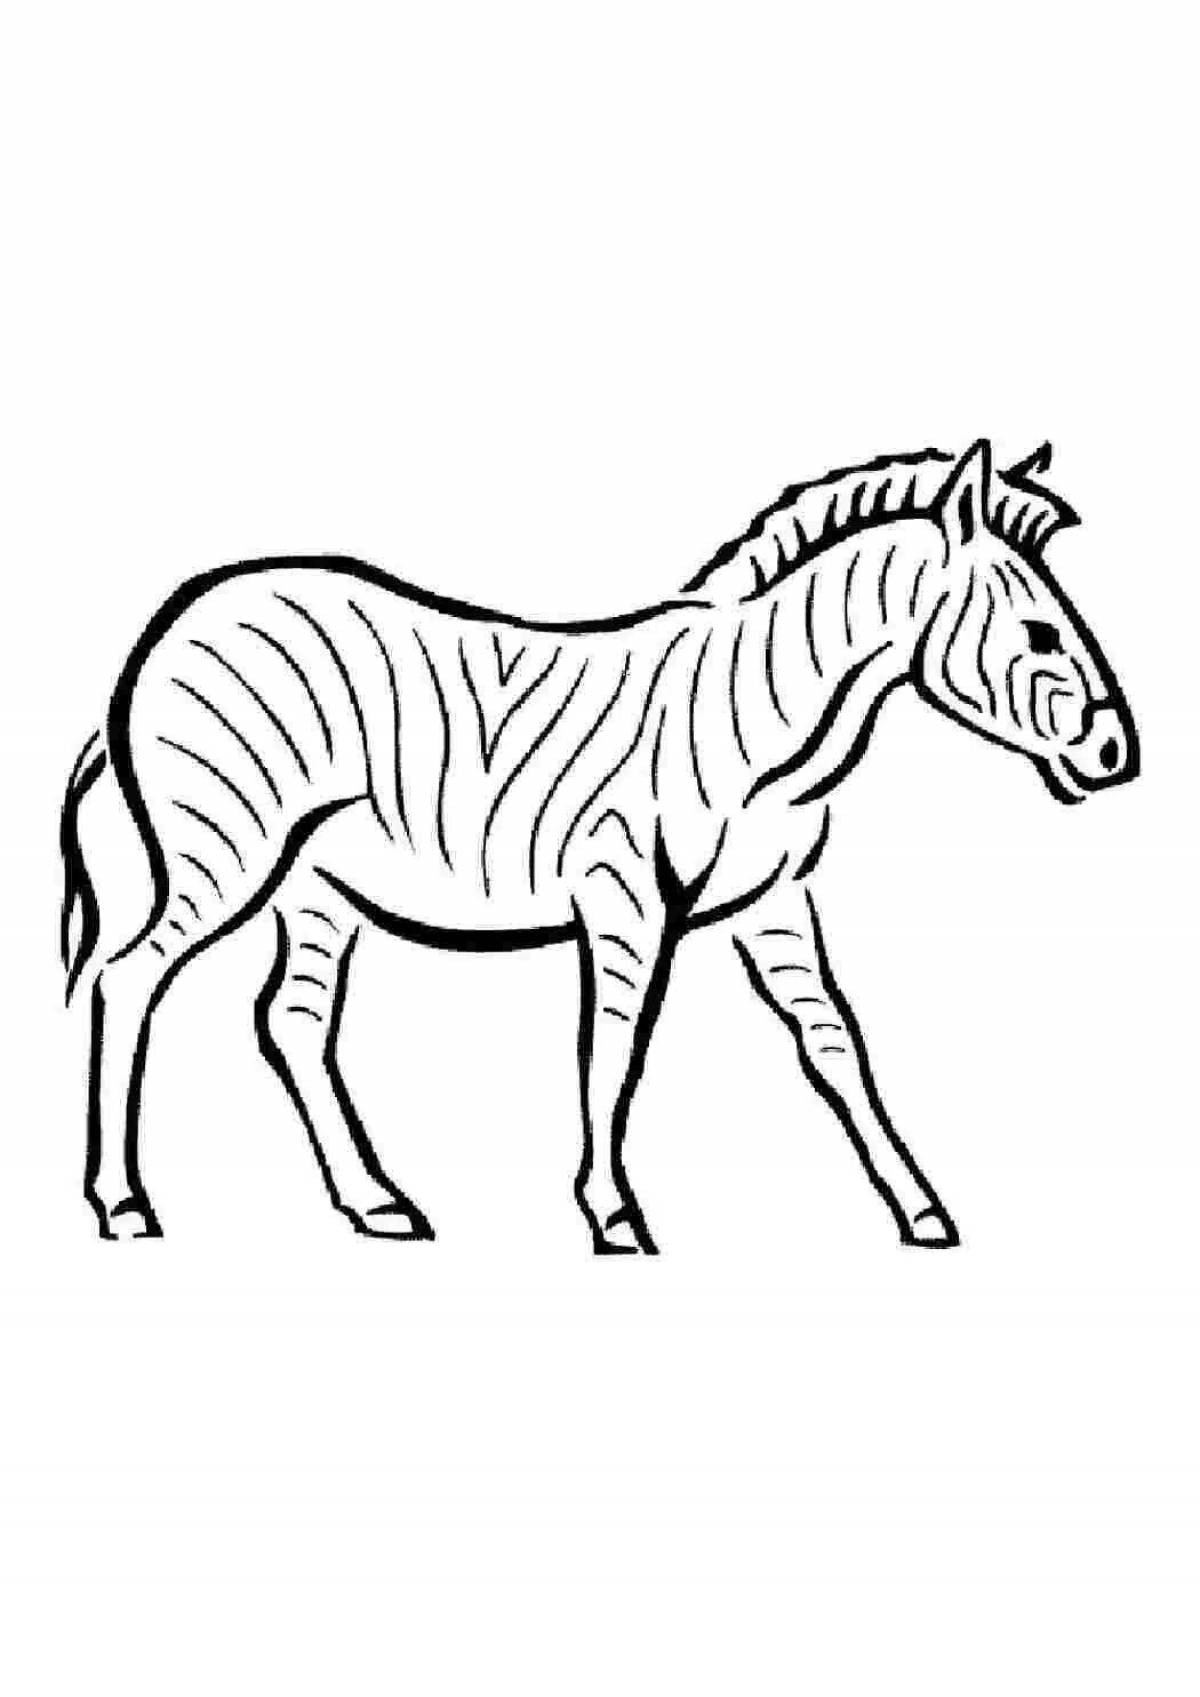 Exciting zebra coloring for kids